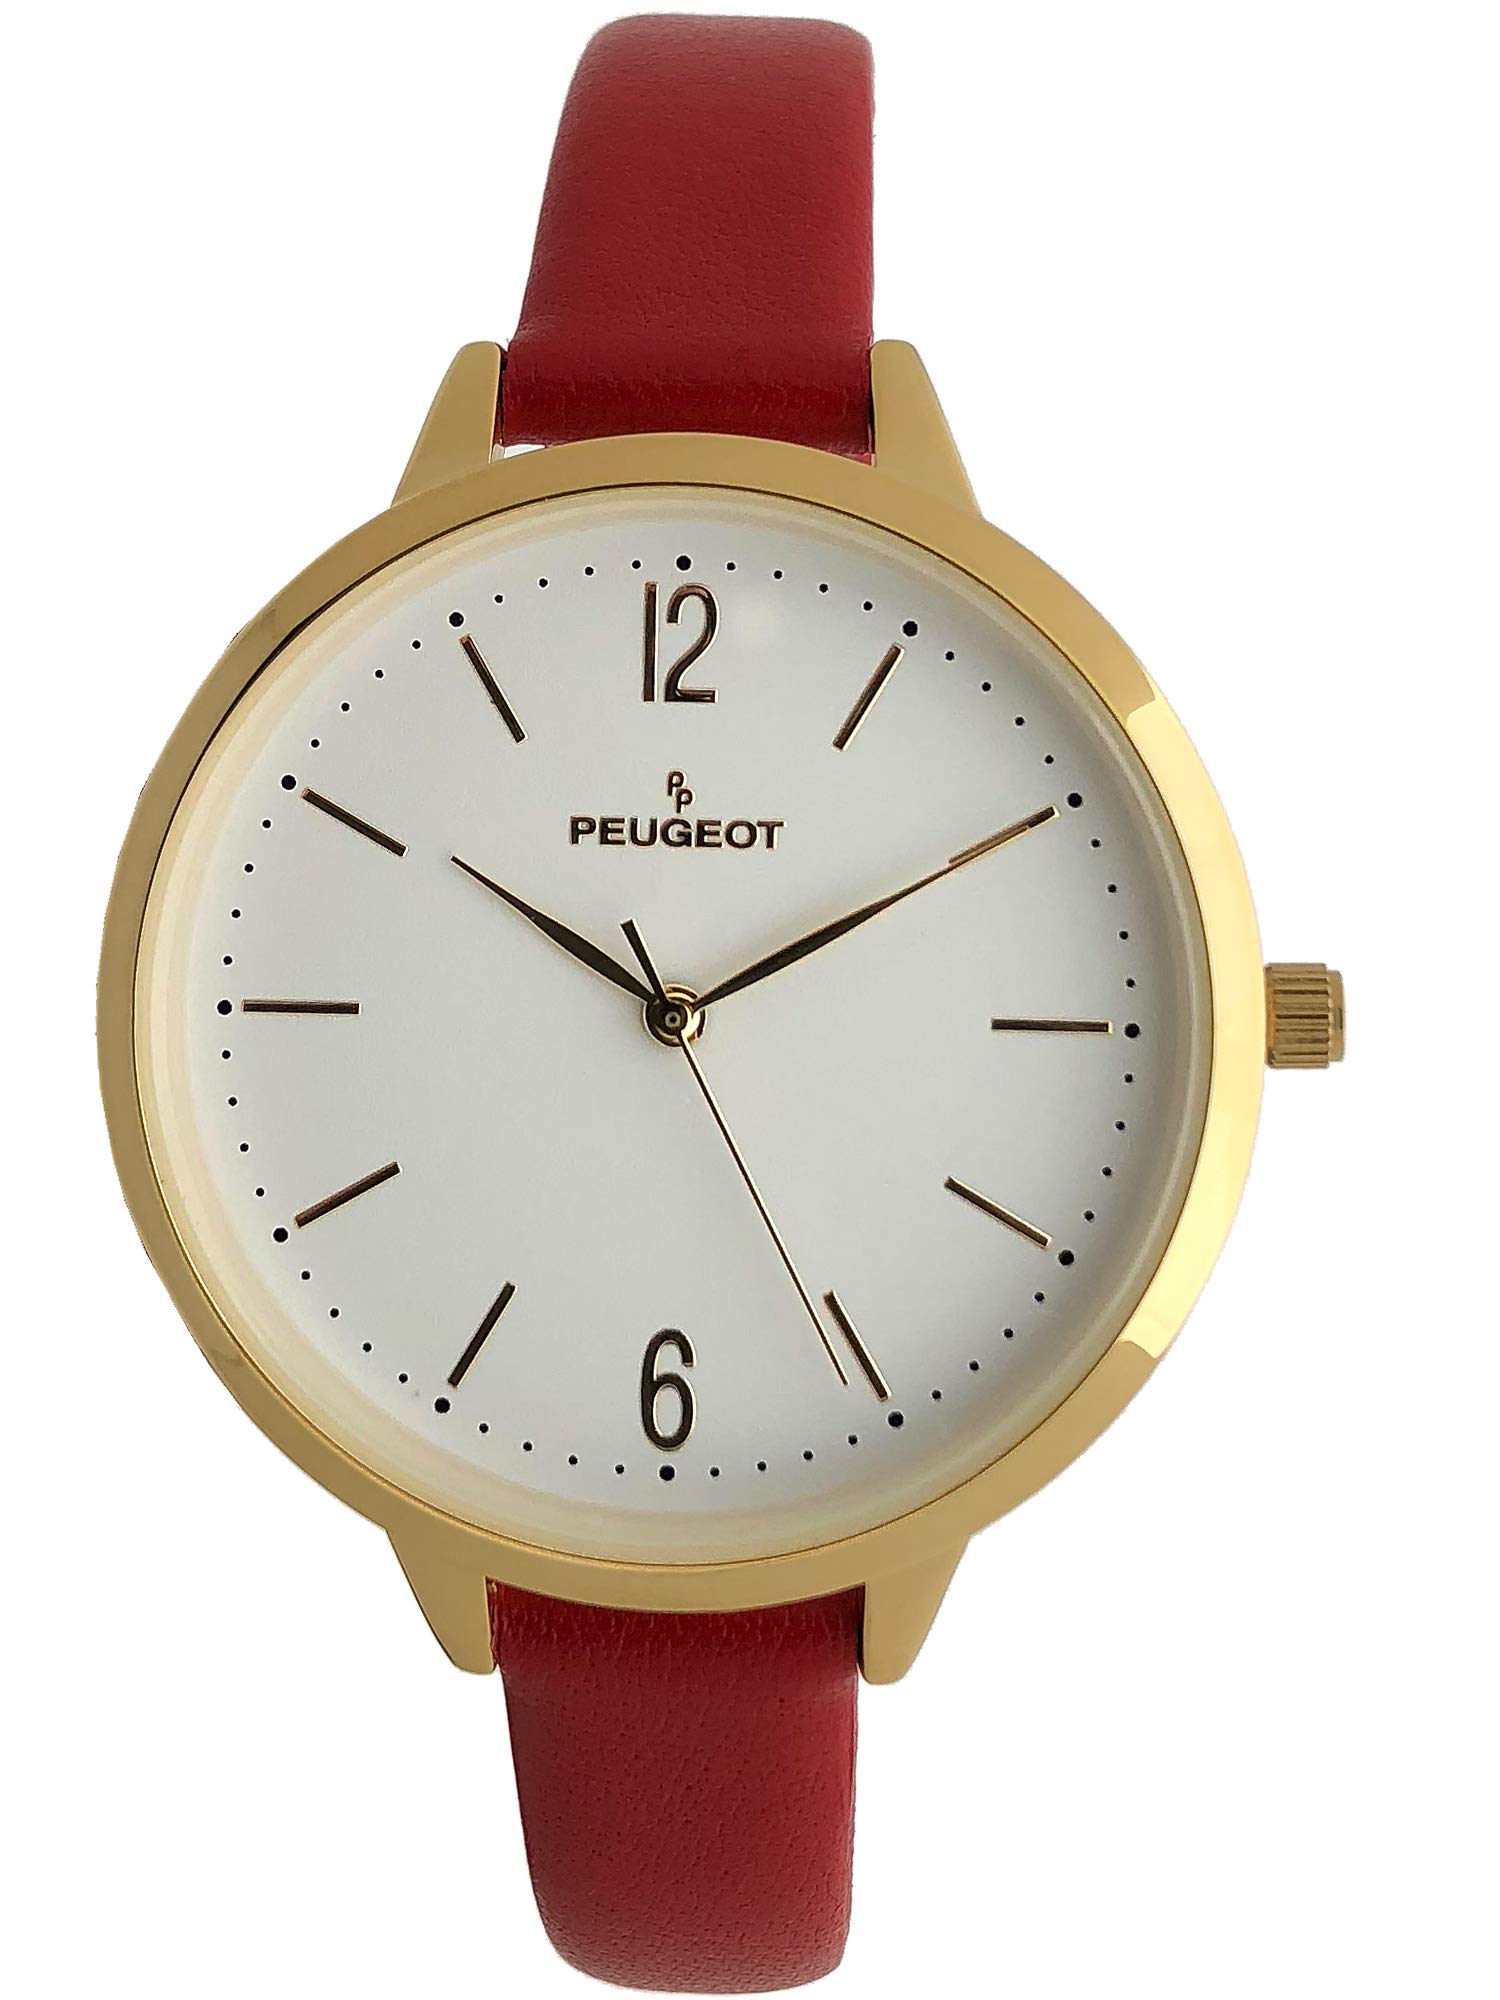 Peugeot Women's Slim Watch, 14K Gold Plated Large Face Watch with Skinny Leather Strap